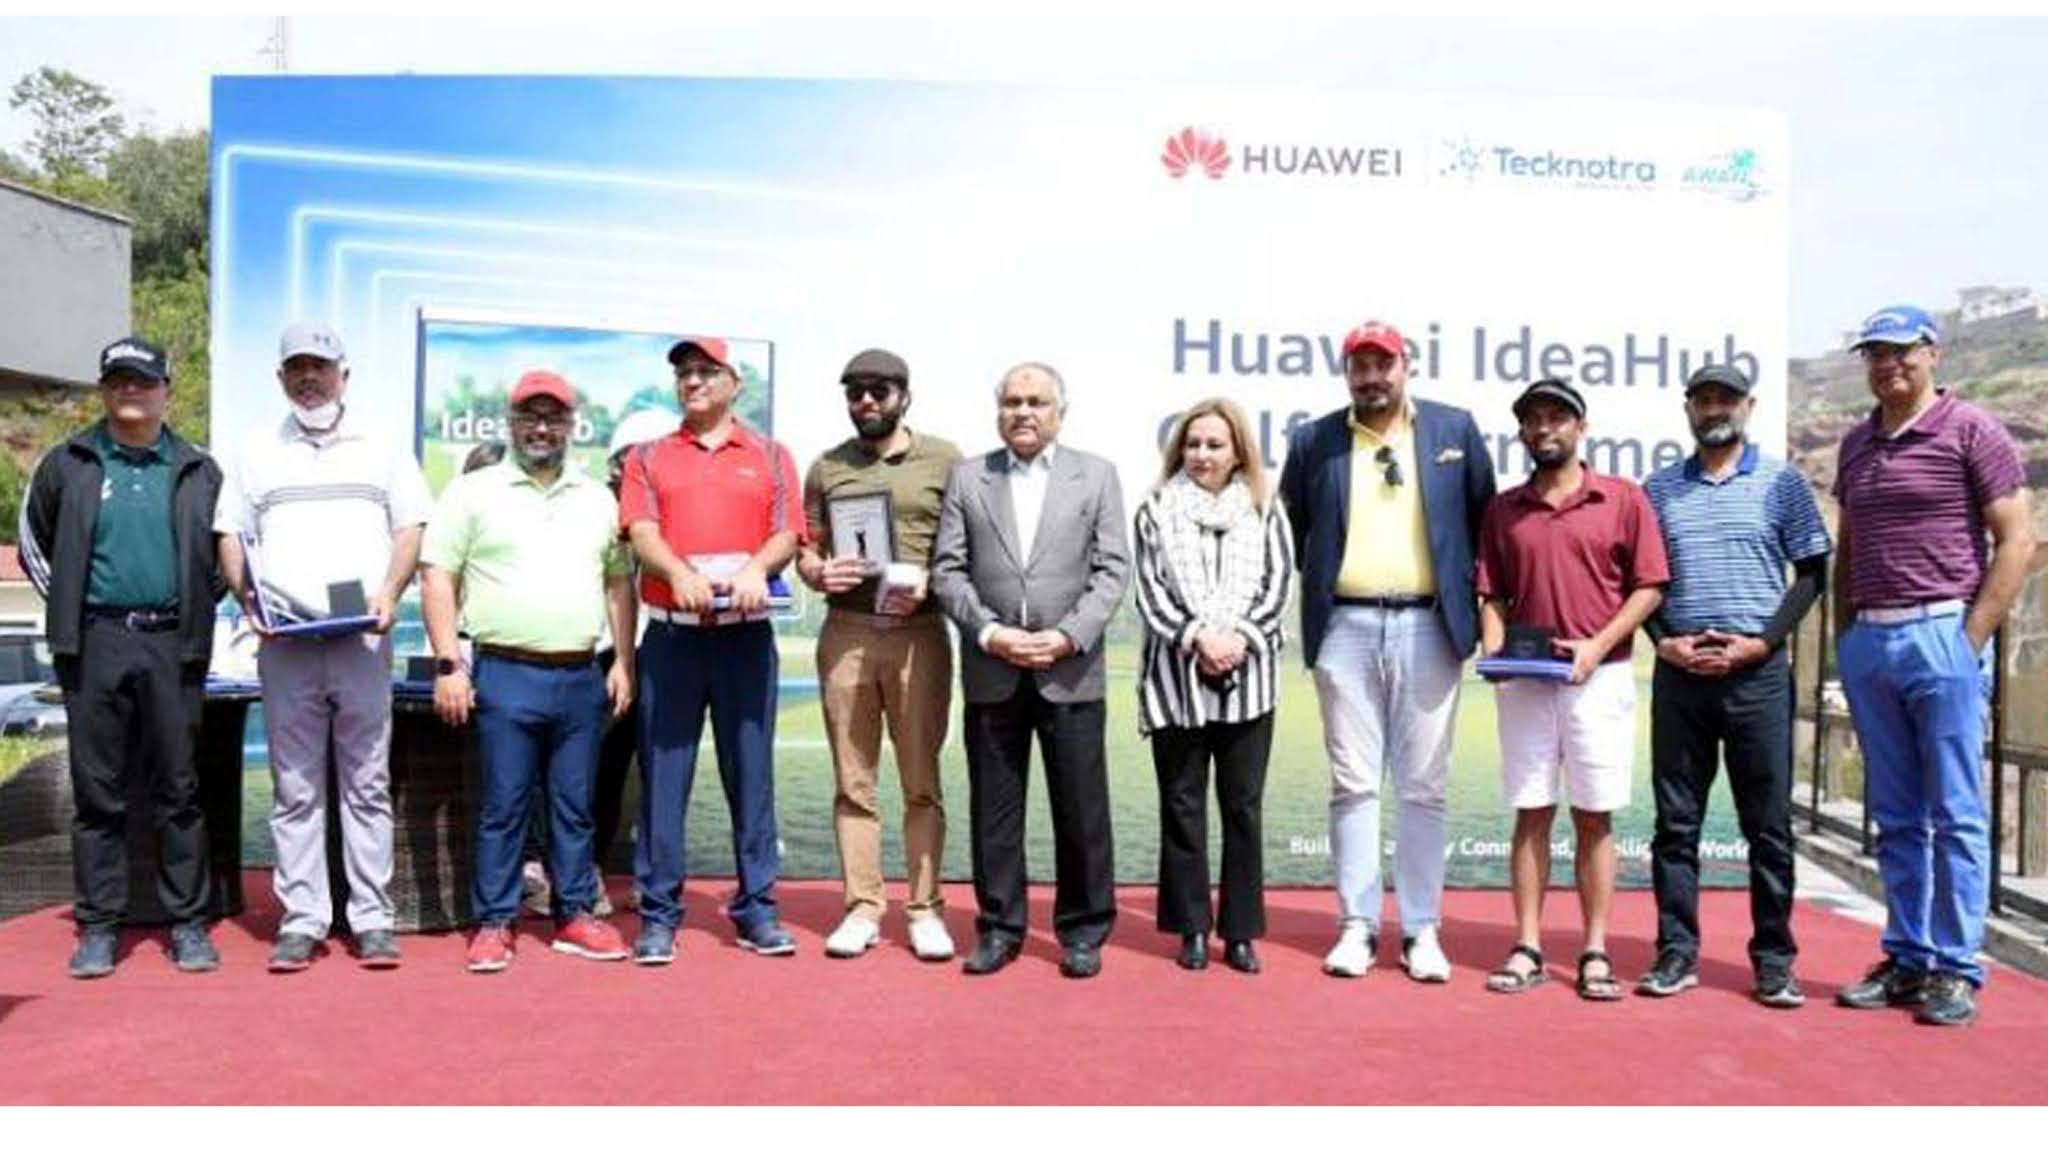 Huawei Pakistan organizes IdeaHub Golf Tournament to promote sports among ICT sector